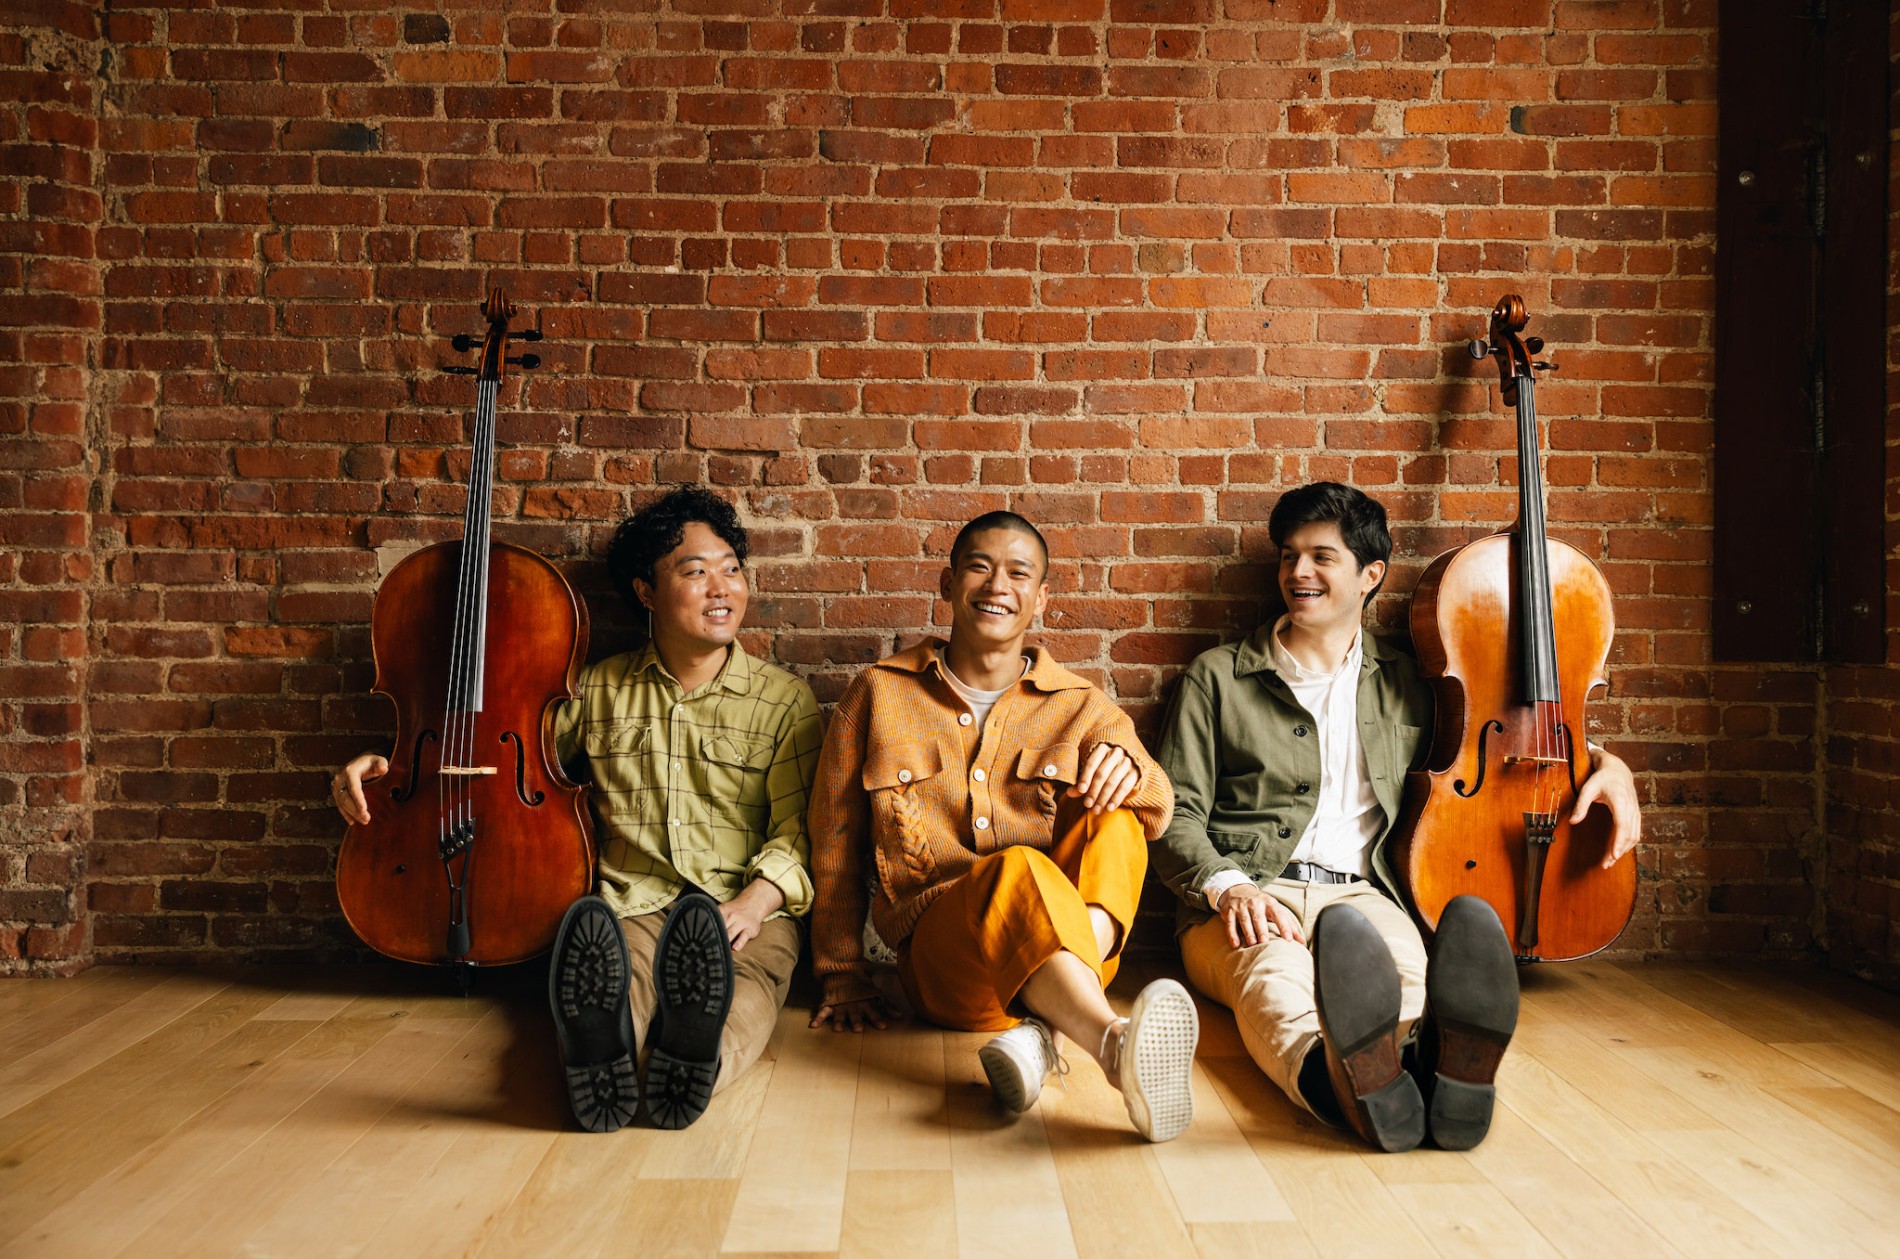 Empire Wild publicity photo: two cellists on either side of a third musician, all seated, posed, on the floor.